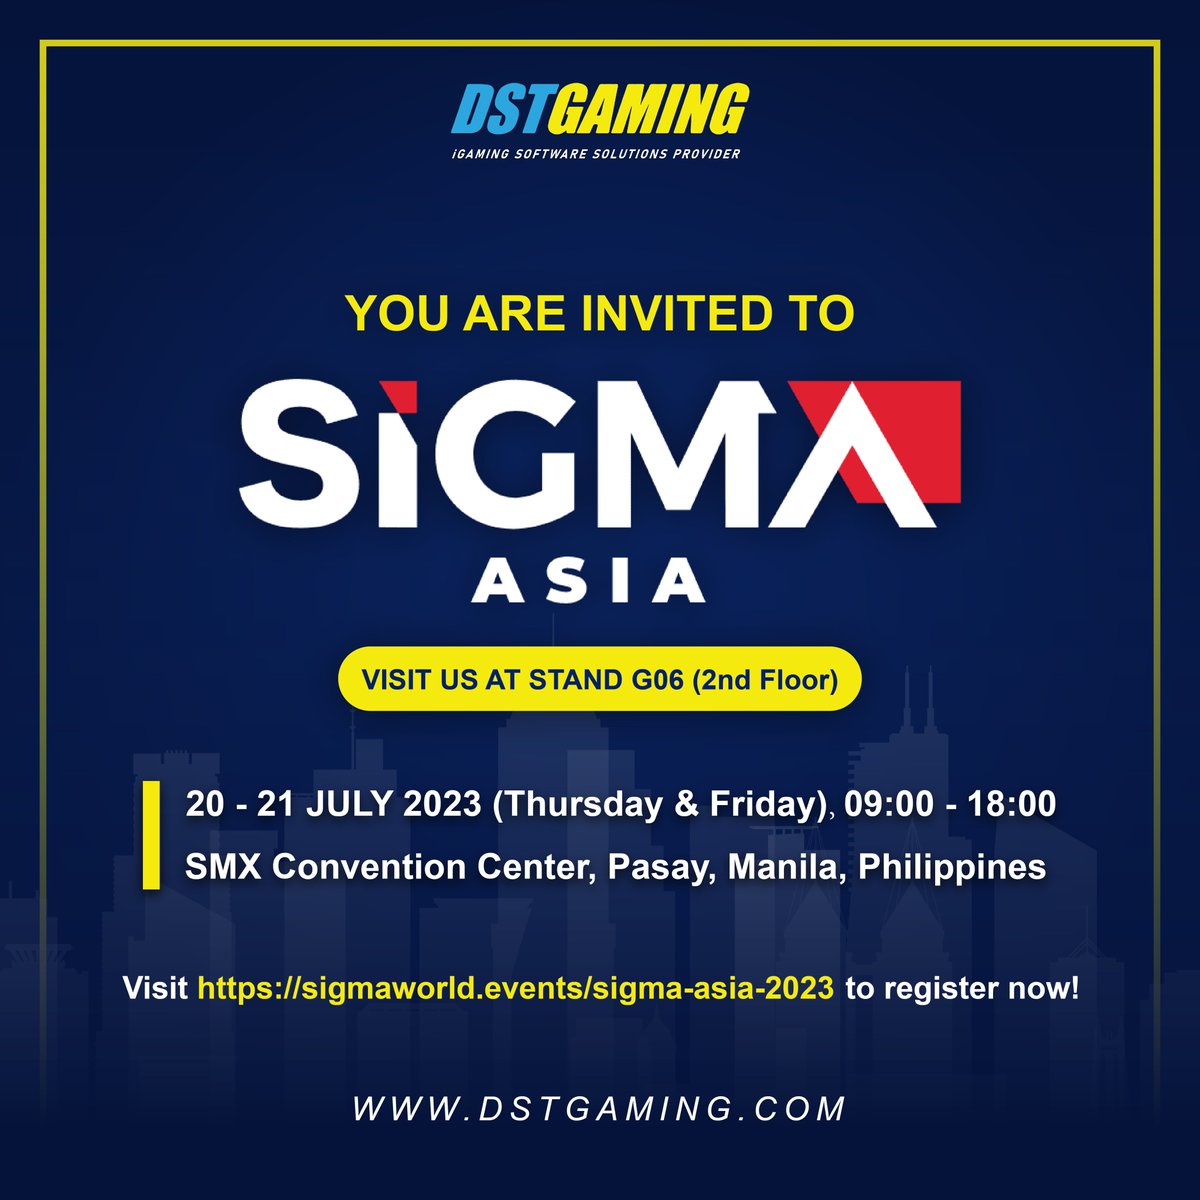 DSTGaming is proud to participate in Sigma Asia 2023 exhibition🎮! Join us at SMX Convention Center in Pasay, Manila, on 20th and 21st July.

#DSTGaming #SigmaAsia2023 #GamingEnthusiasts #InnovationInGaming #JoinTheJourney #whitelabelcasino #igamingsolution #现金网 #包网